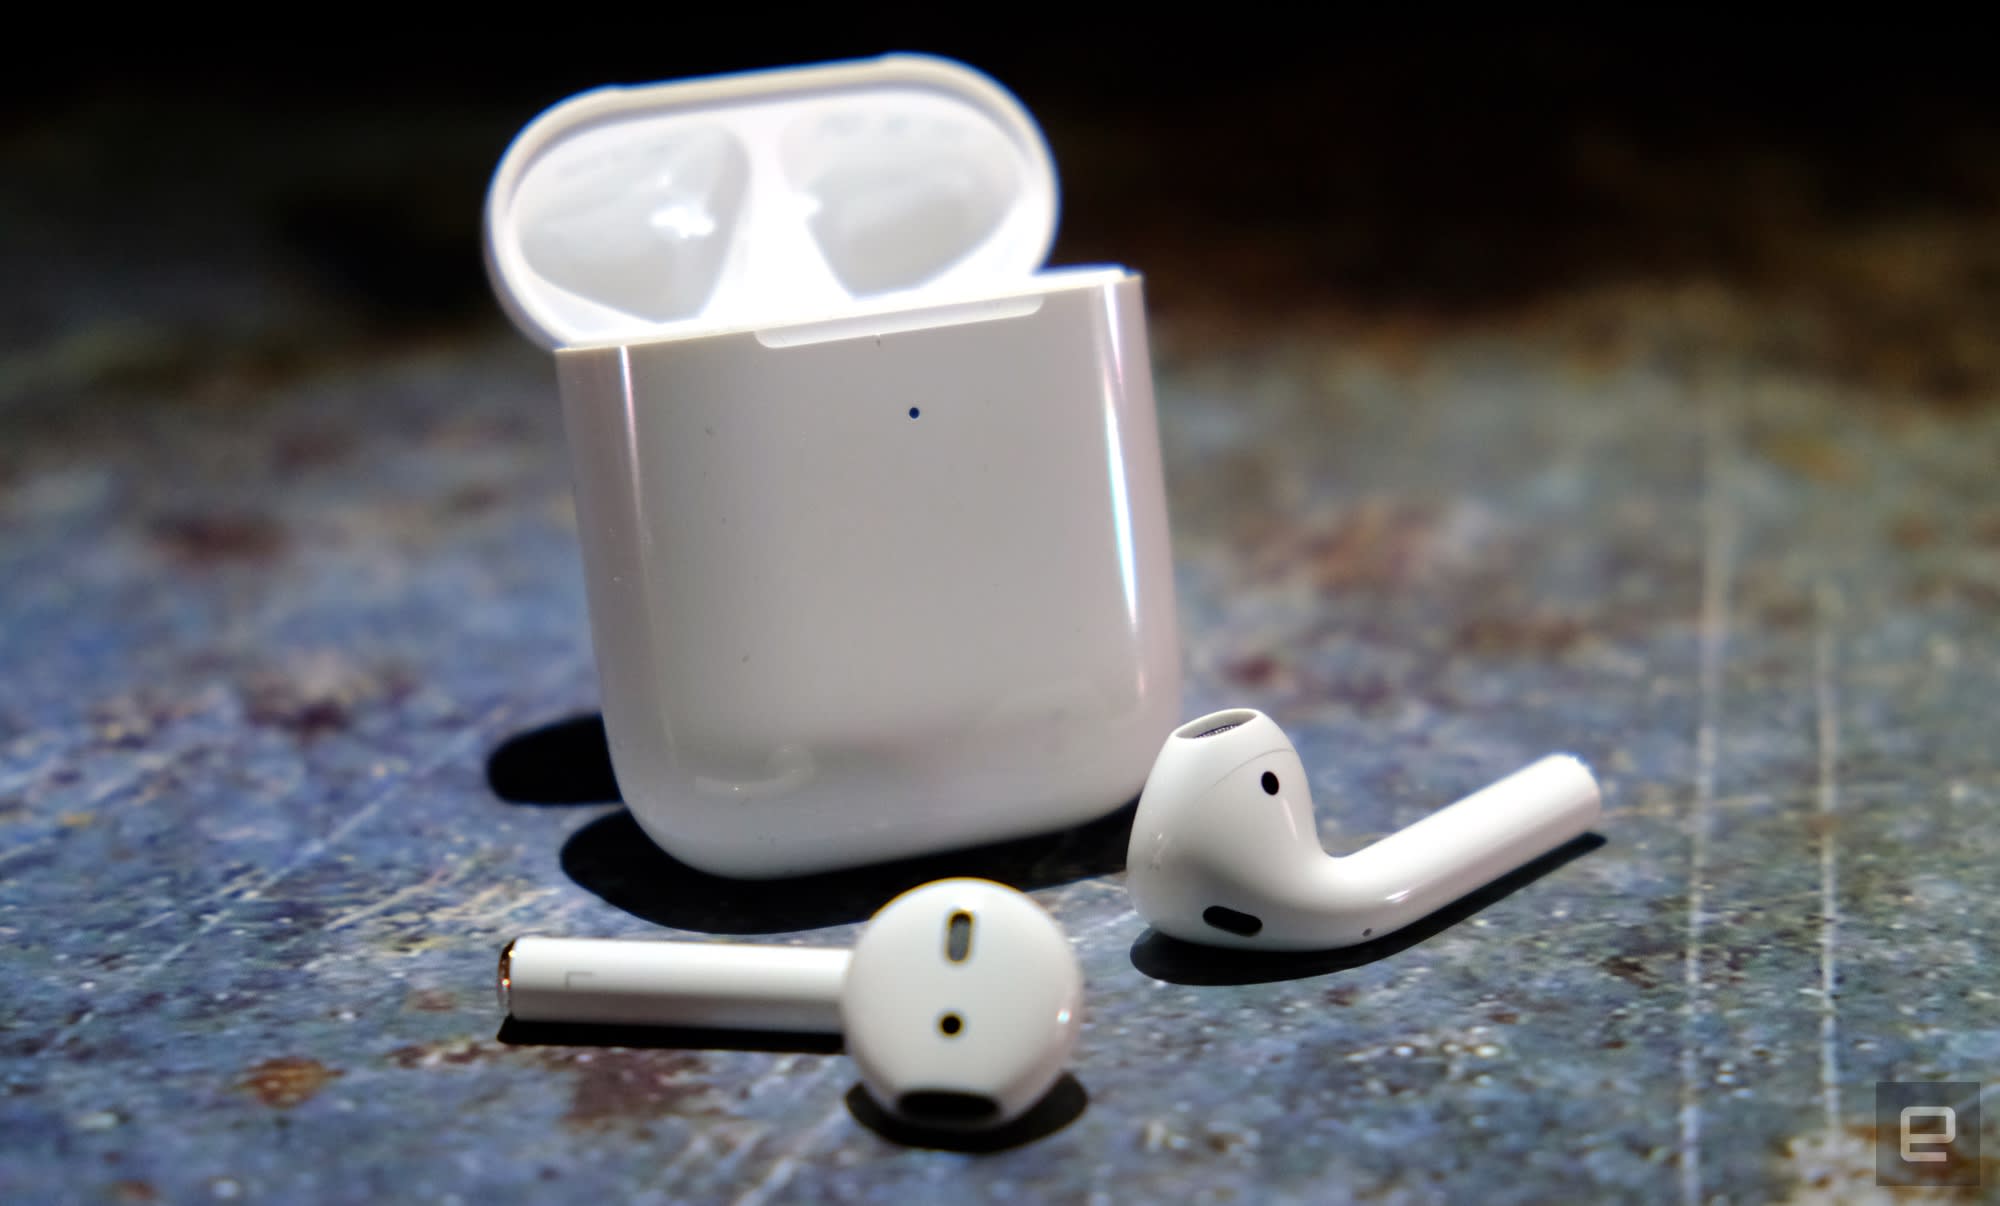 The best deals on AirPods, iPads and other Apple devices for October Prime Day